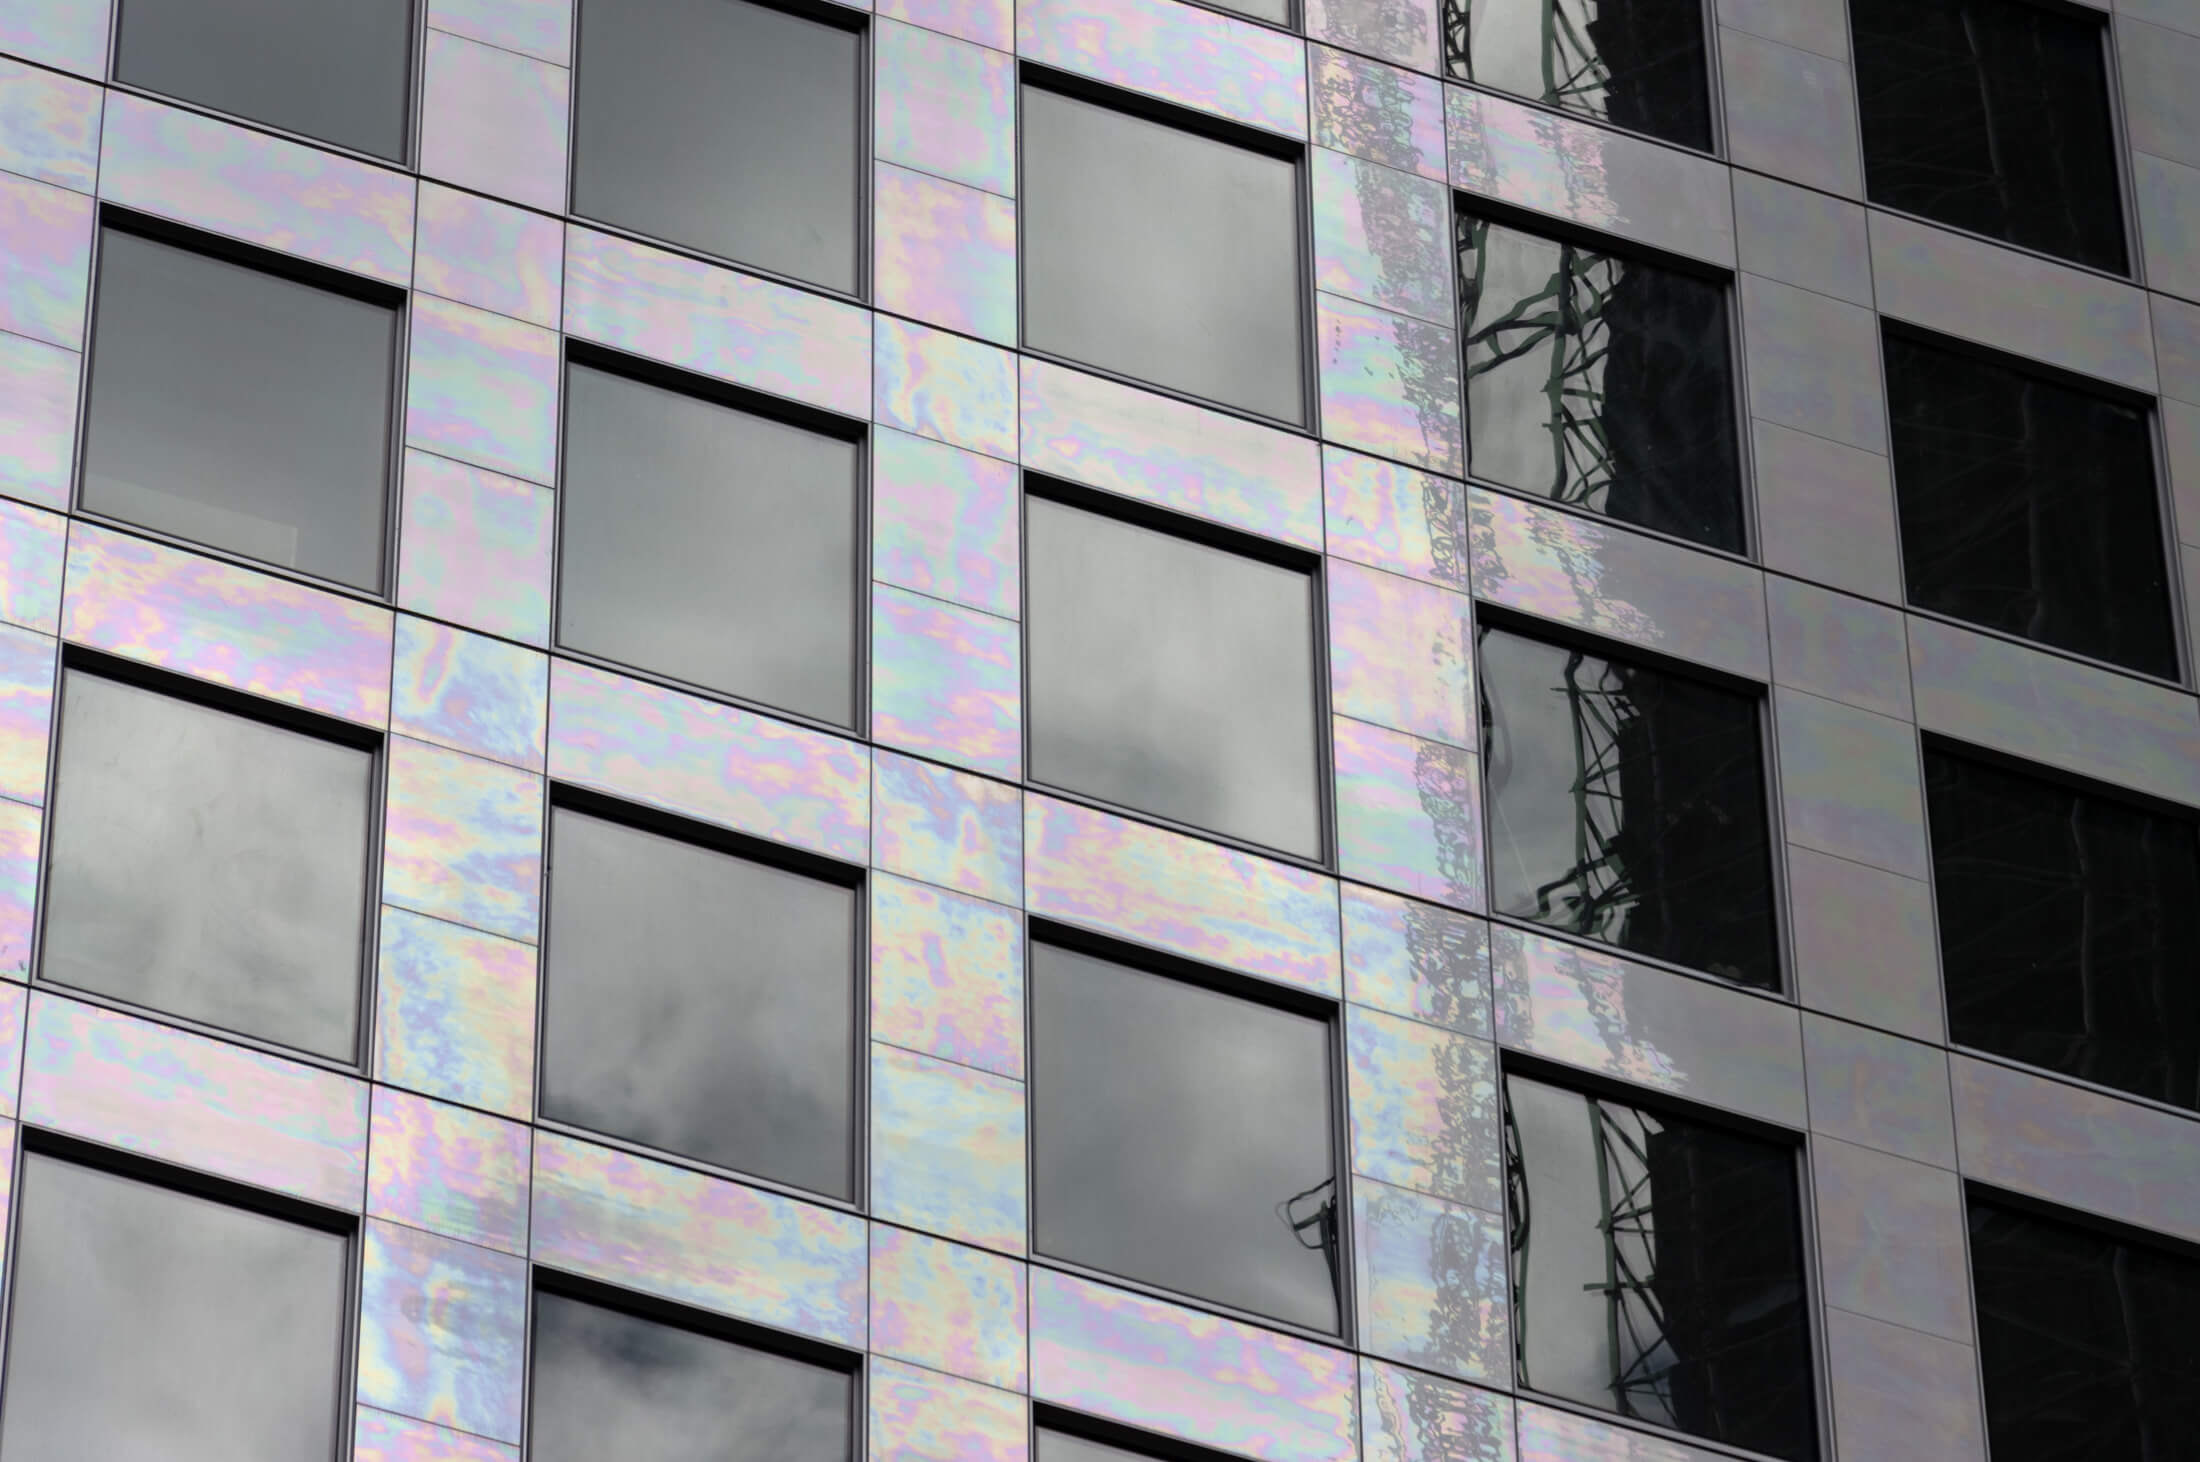 the iridescent porcelain tile on the facade shimmers with multiple colors in the sun